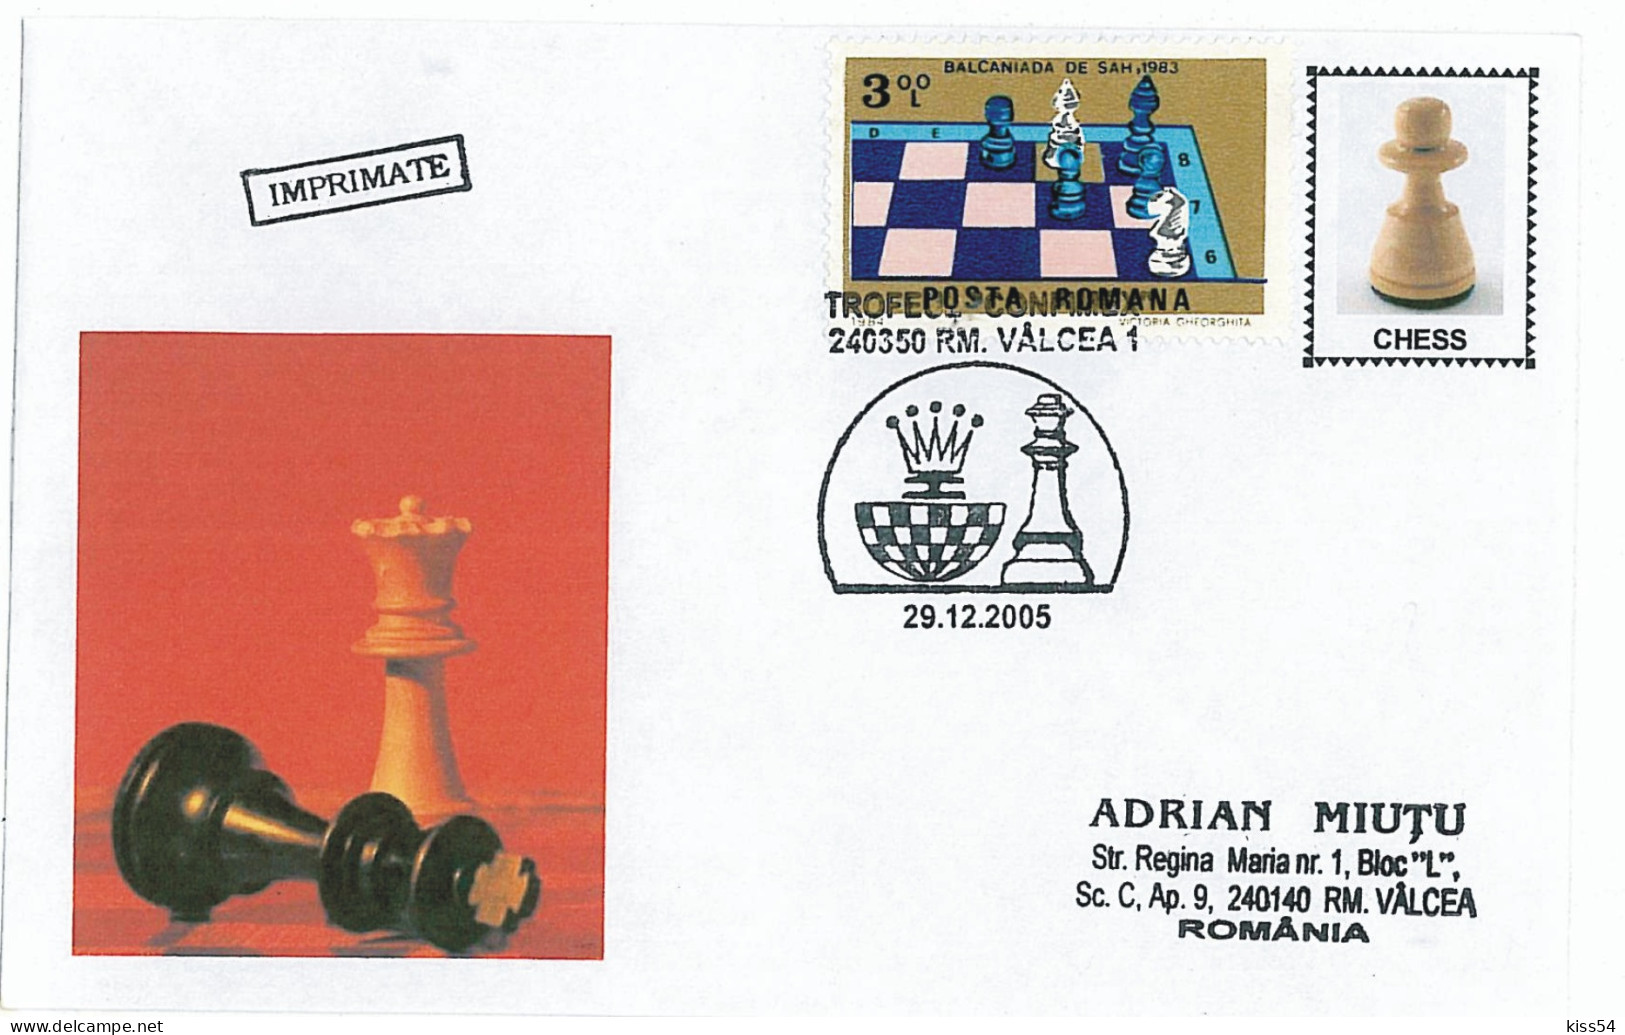 COV 82 - 218 CHESS, Romania - Cover - Used - 2005 - Covers & Documents